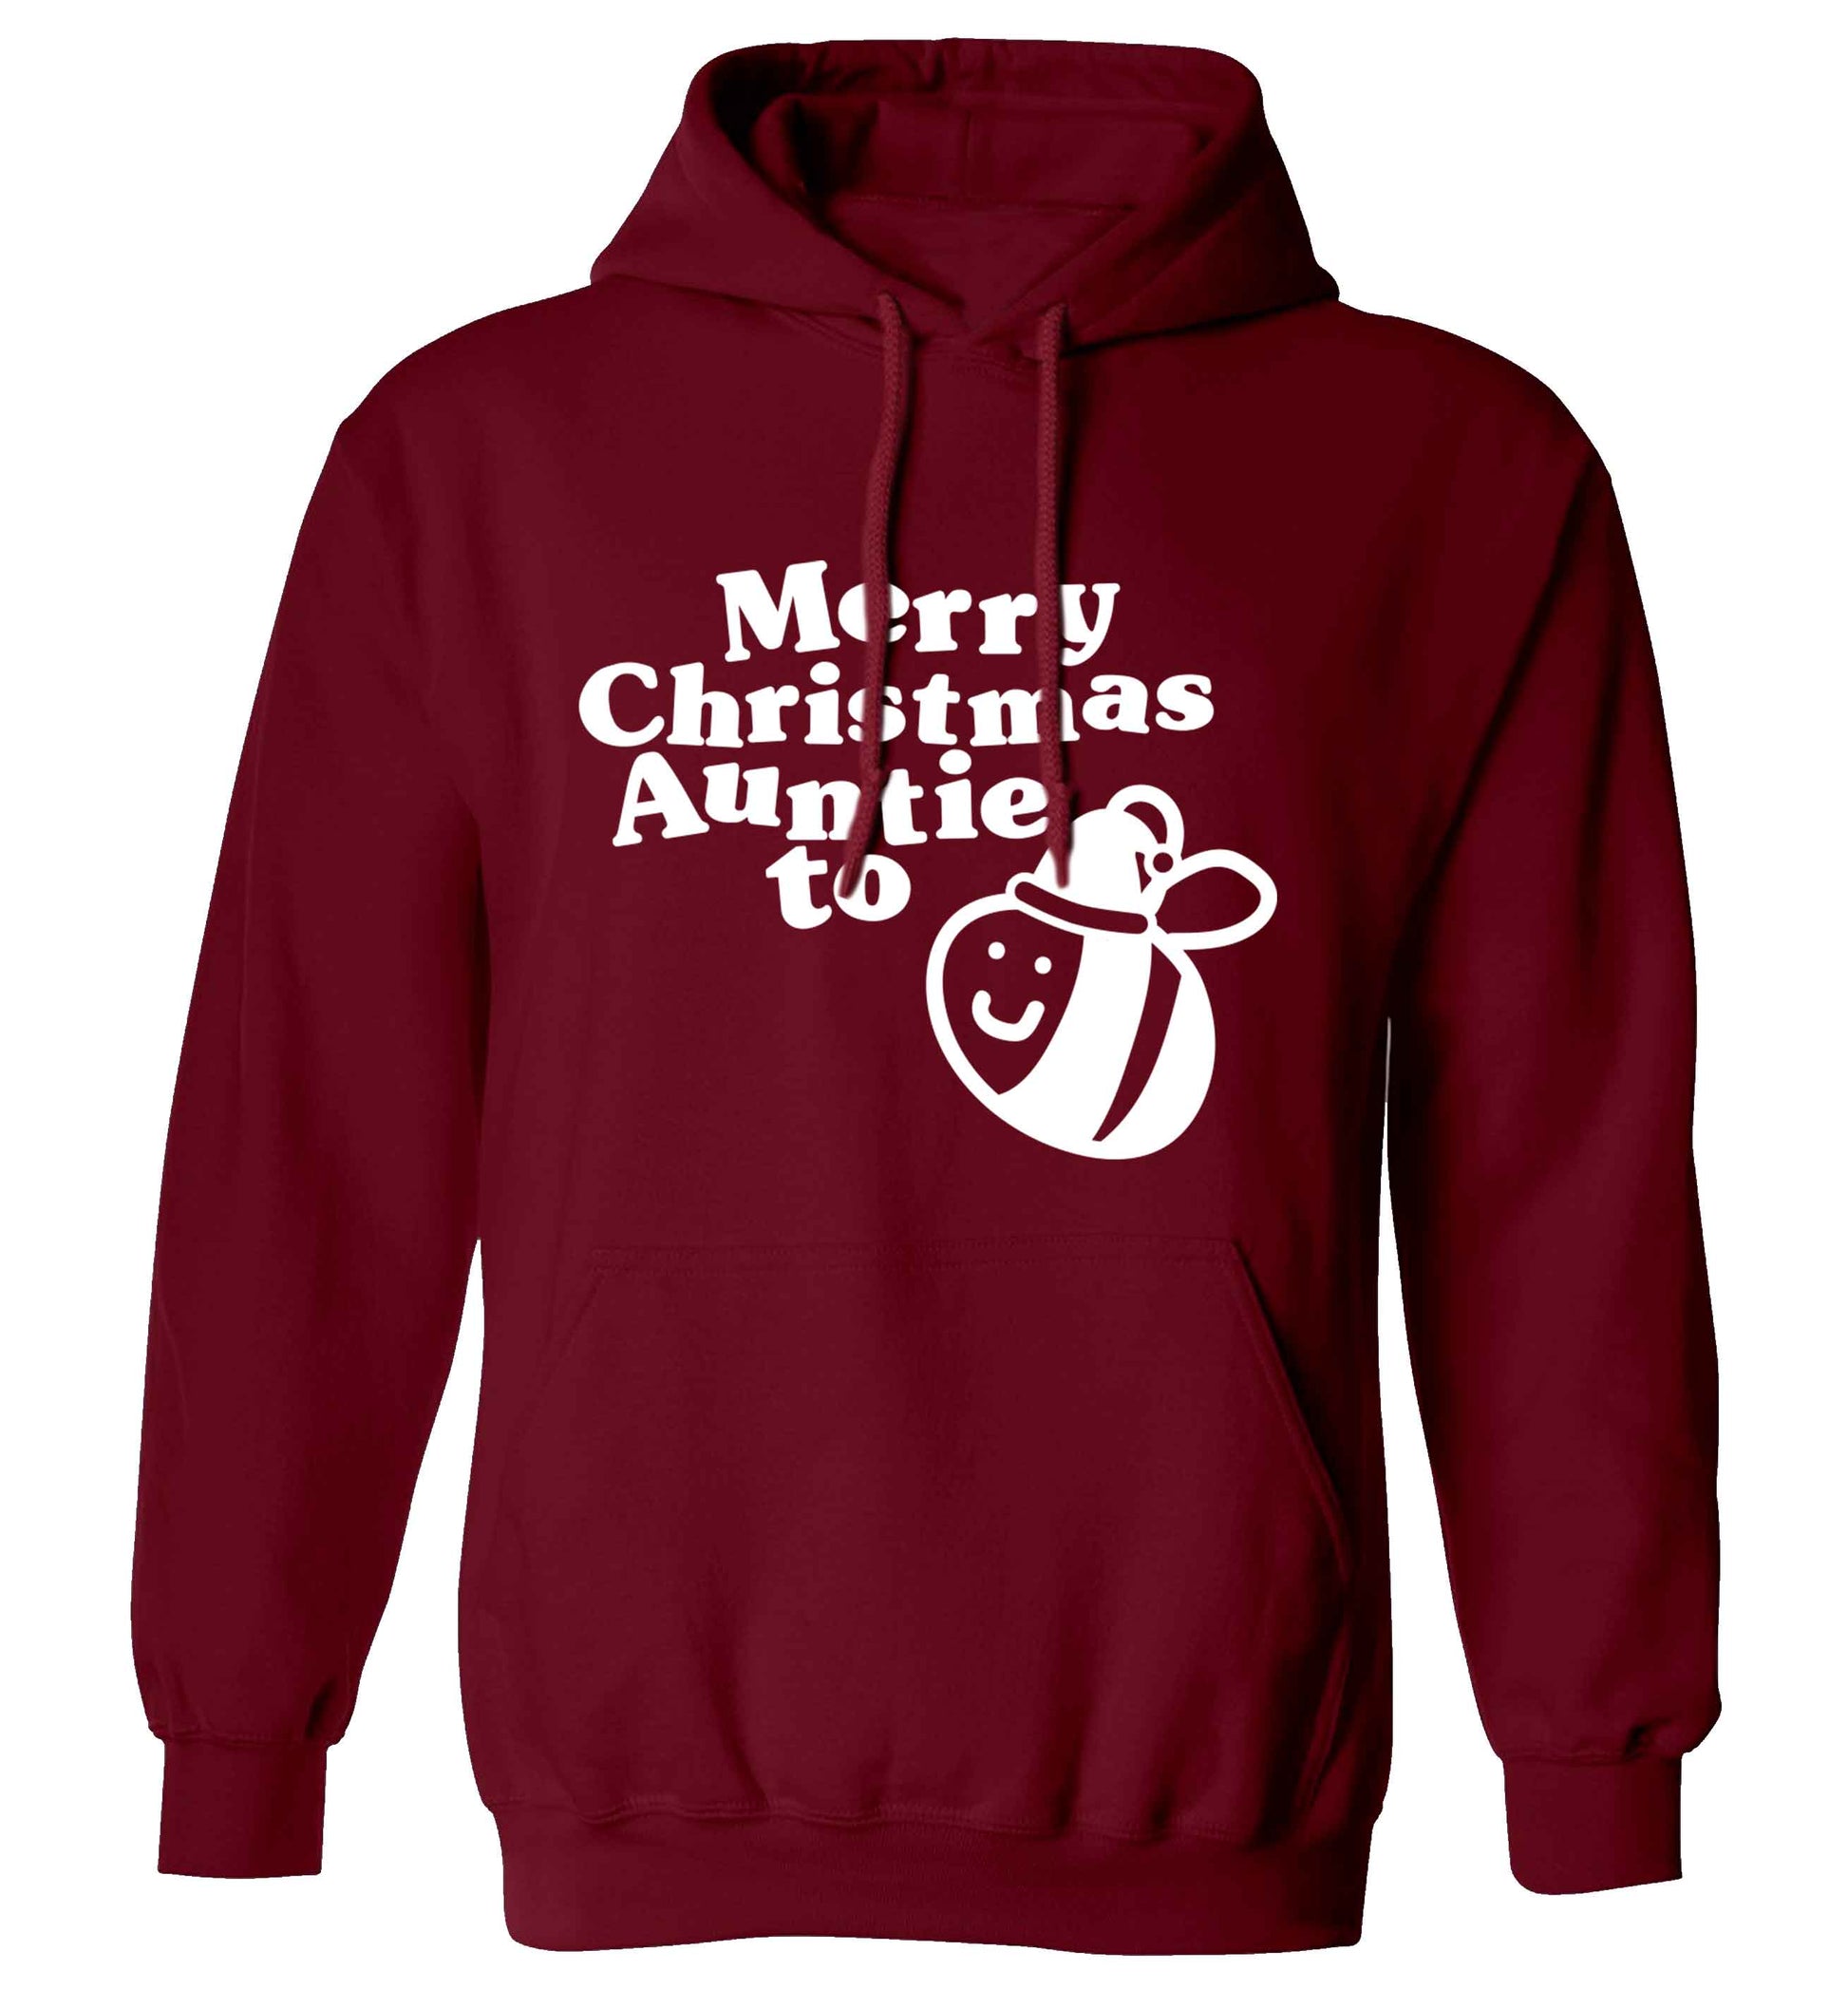 Merry Christmas auntie to be adults unisex maroon hoodie 2XL